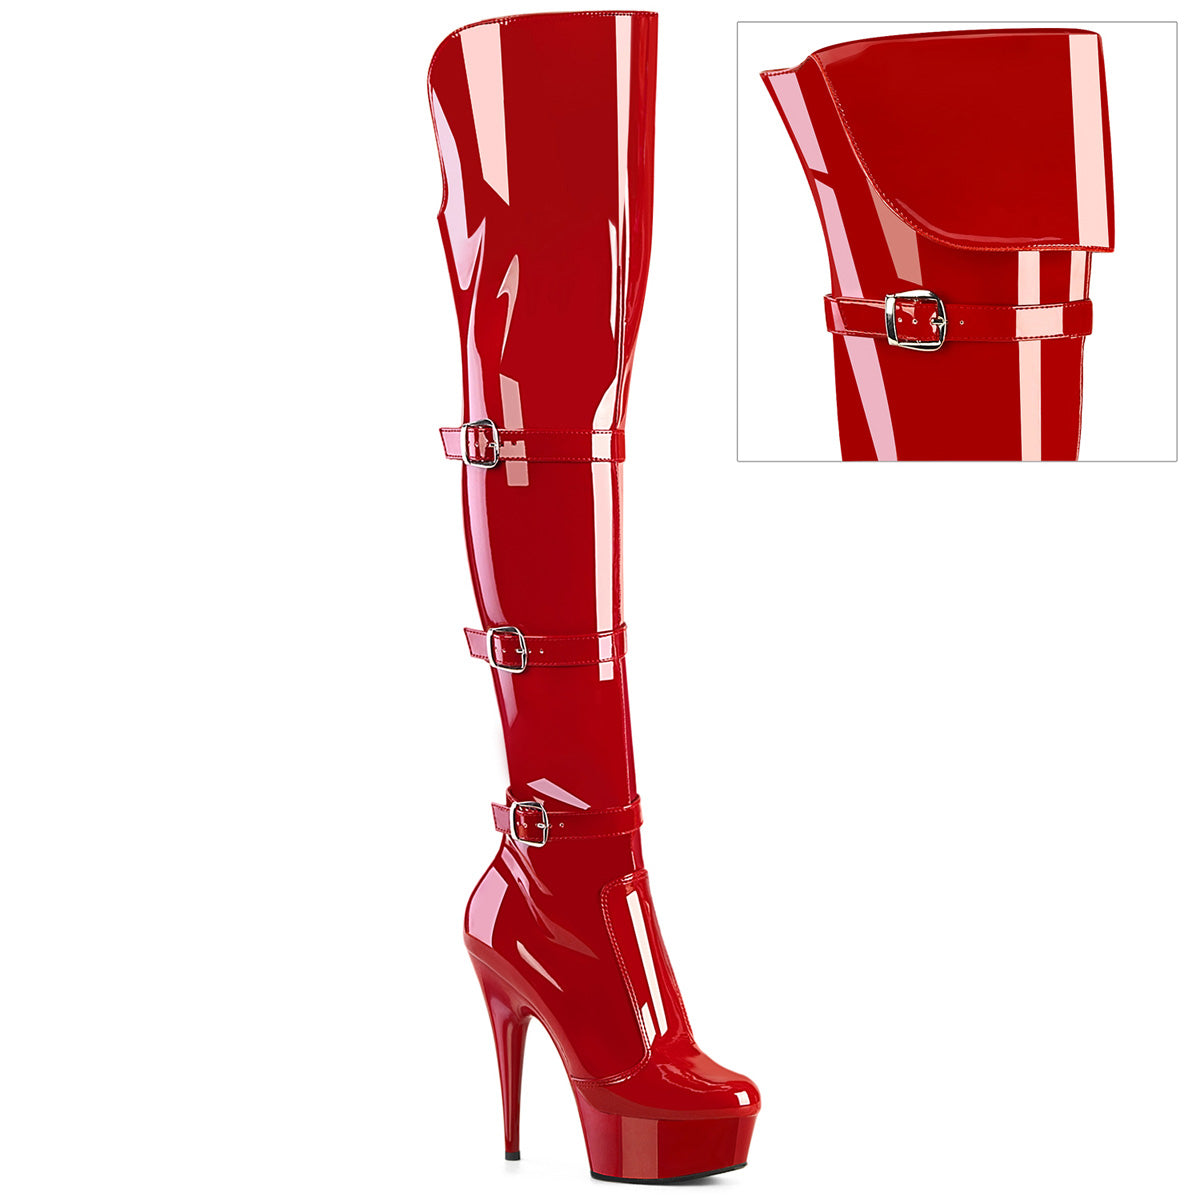 6 Inch Heel DELIGHT-3018 Red Stretch Patent